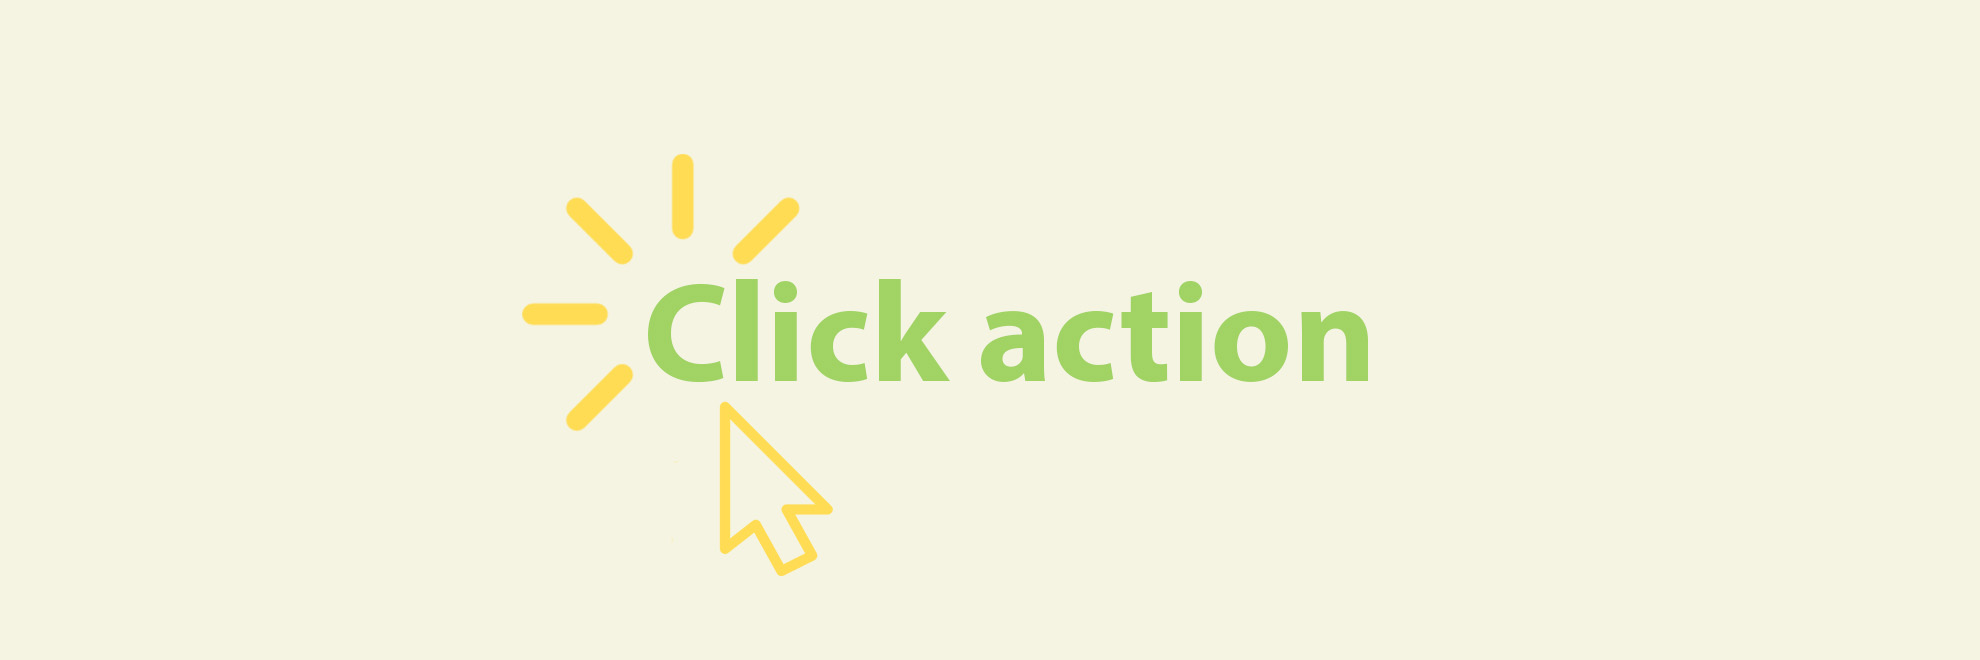 Illustration showing click action text with the mouse cursor and visual click.